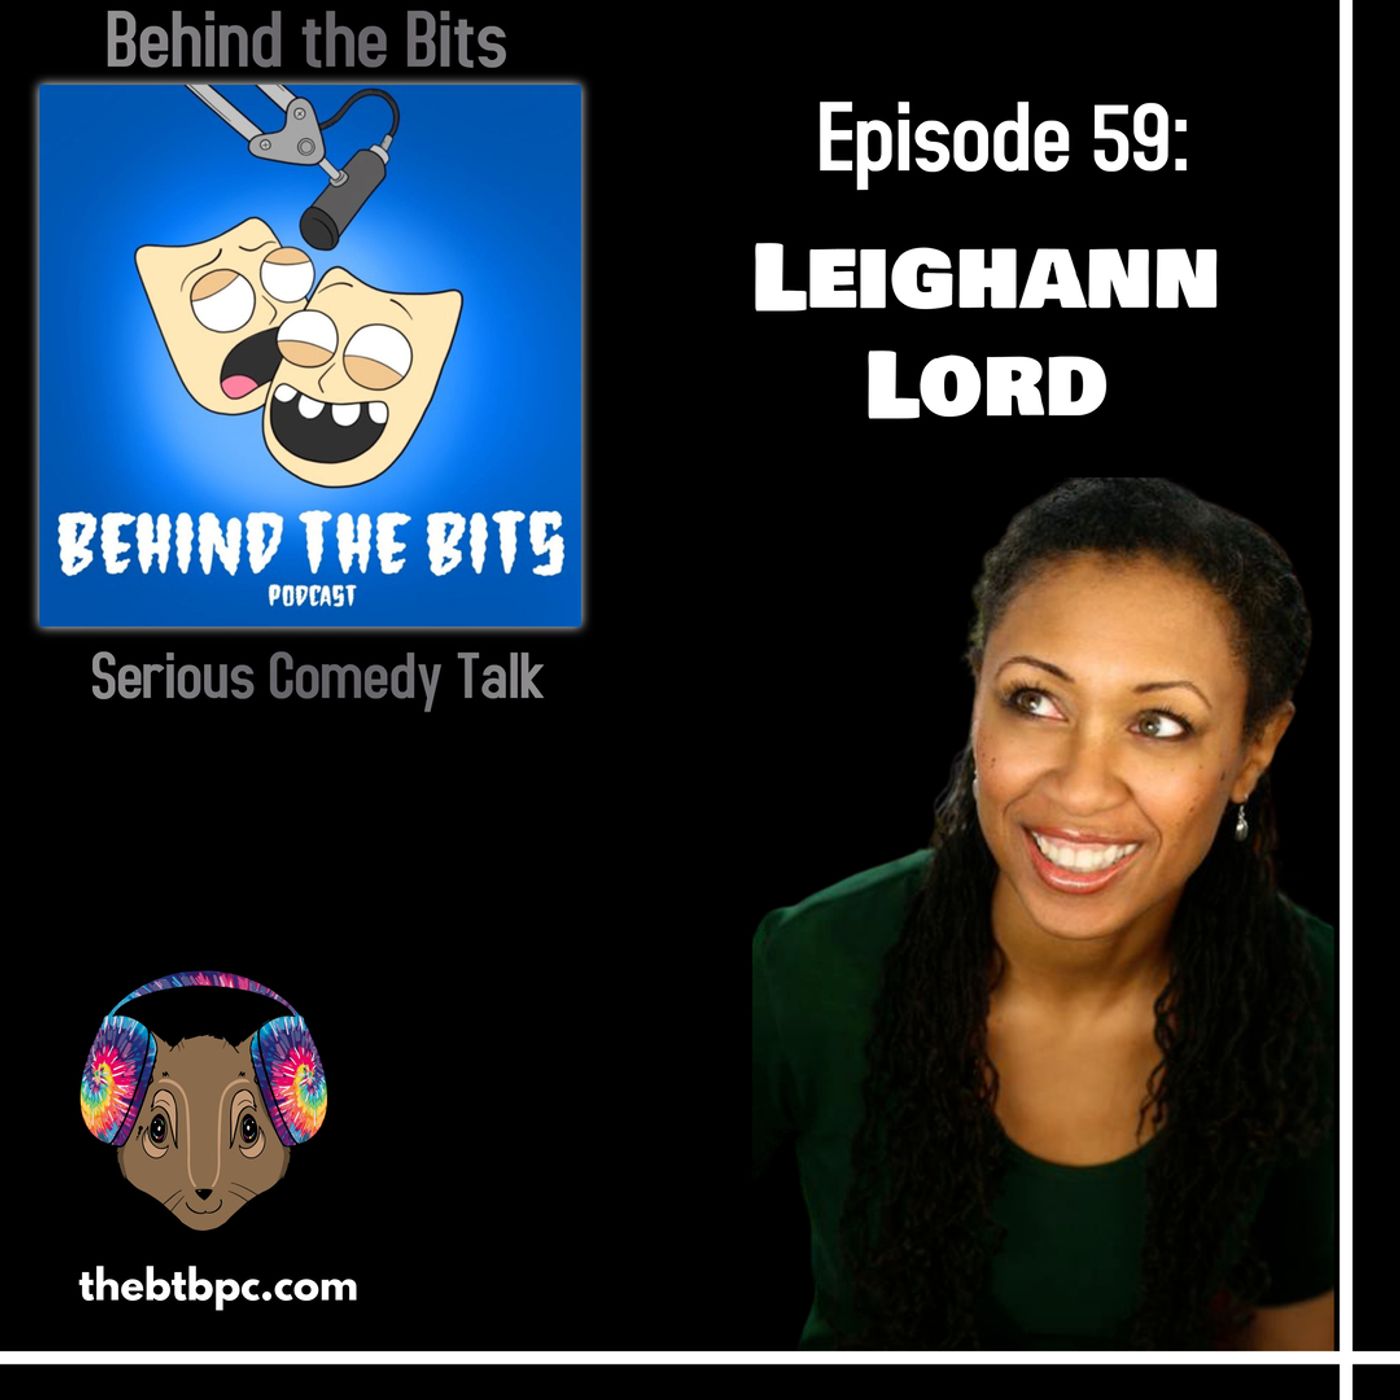 Episode 59: Leighann Lord Image